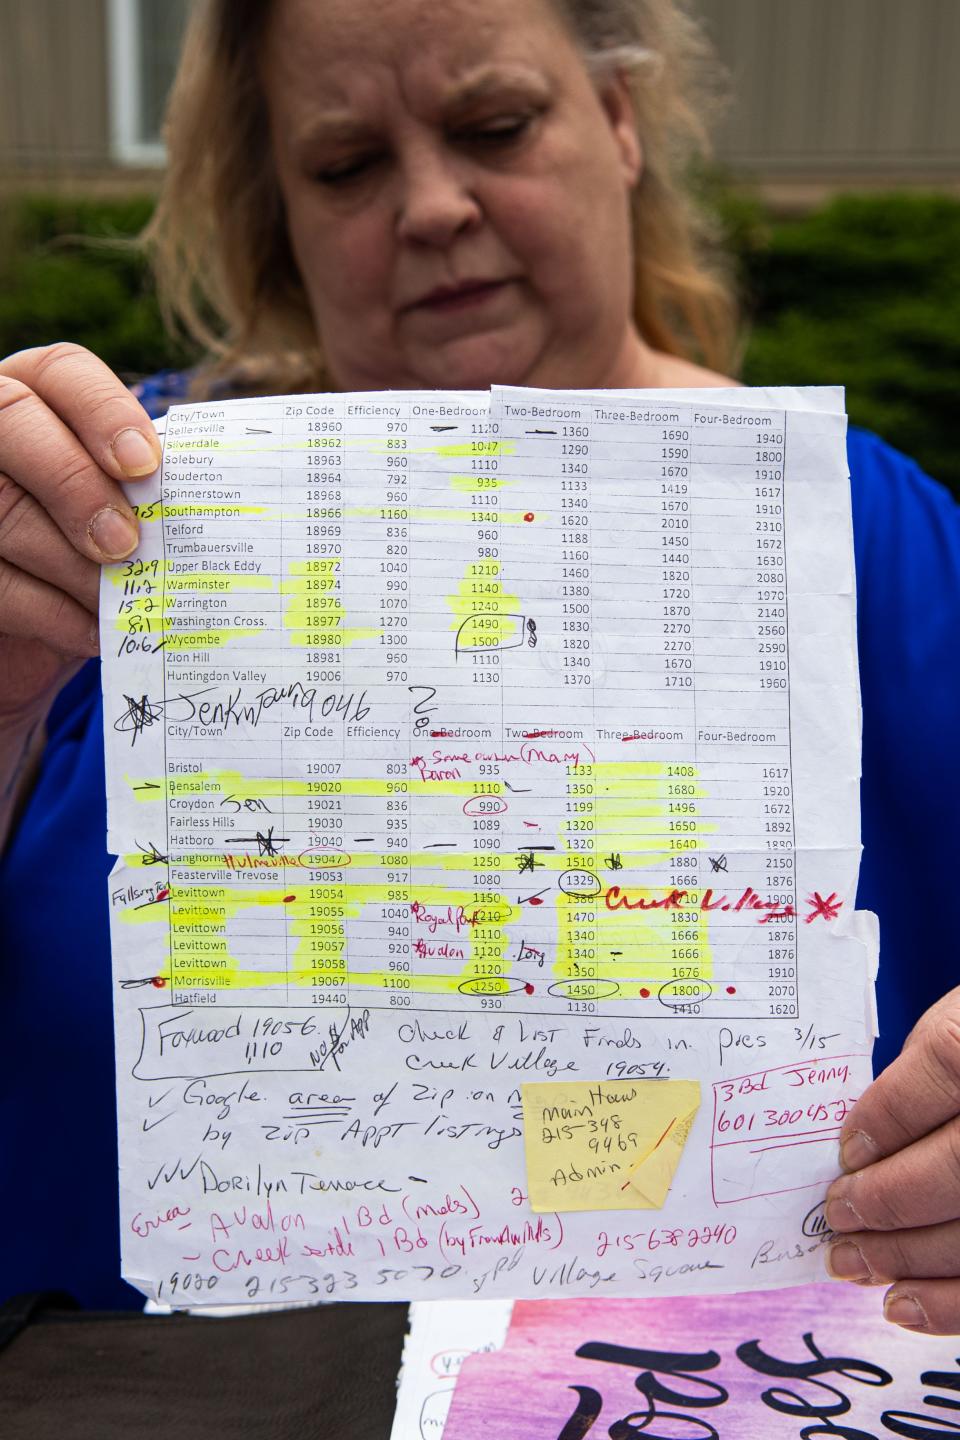 Karen McDonald holds a list of landlords and apartment managers provided by the local housing authority. She was one week from losing her Section 8 voucher when she signed a lease.